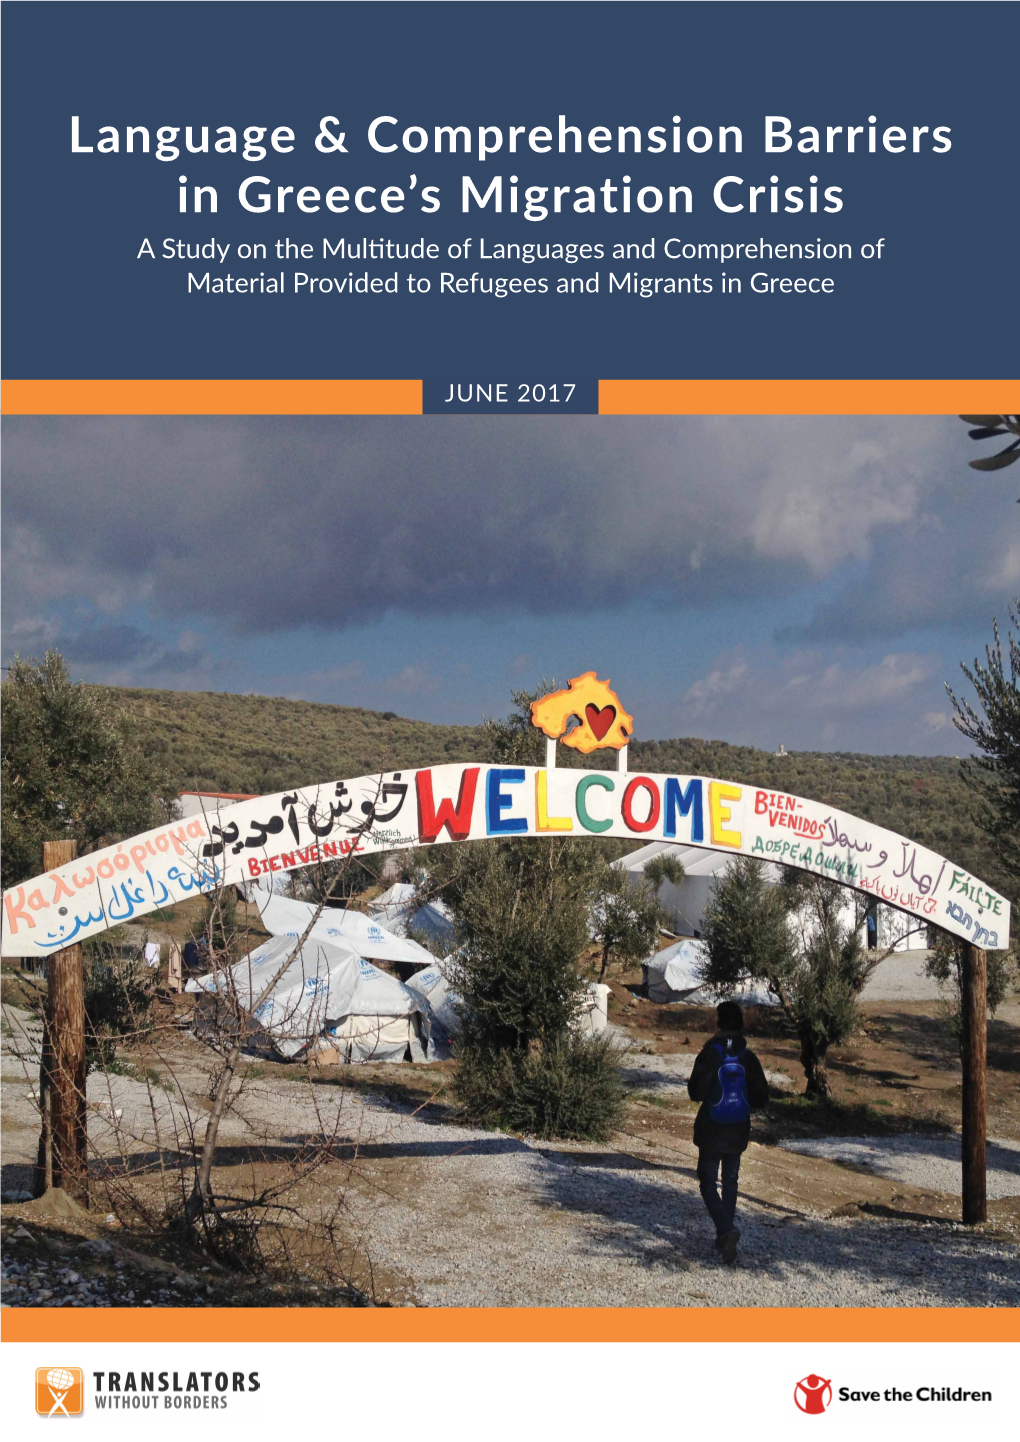 Language & Comprehension Barriers in Greece's Migration Crisis